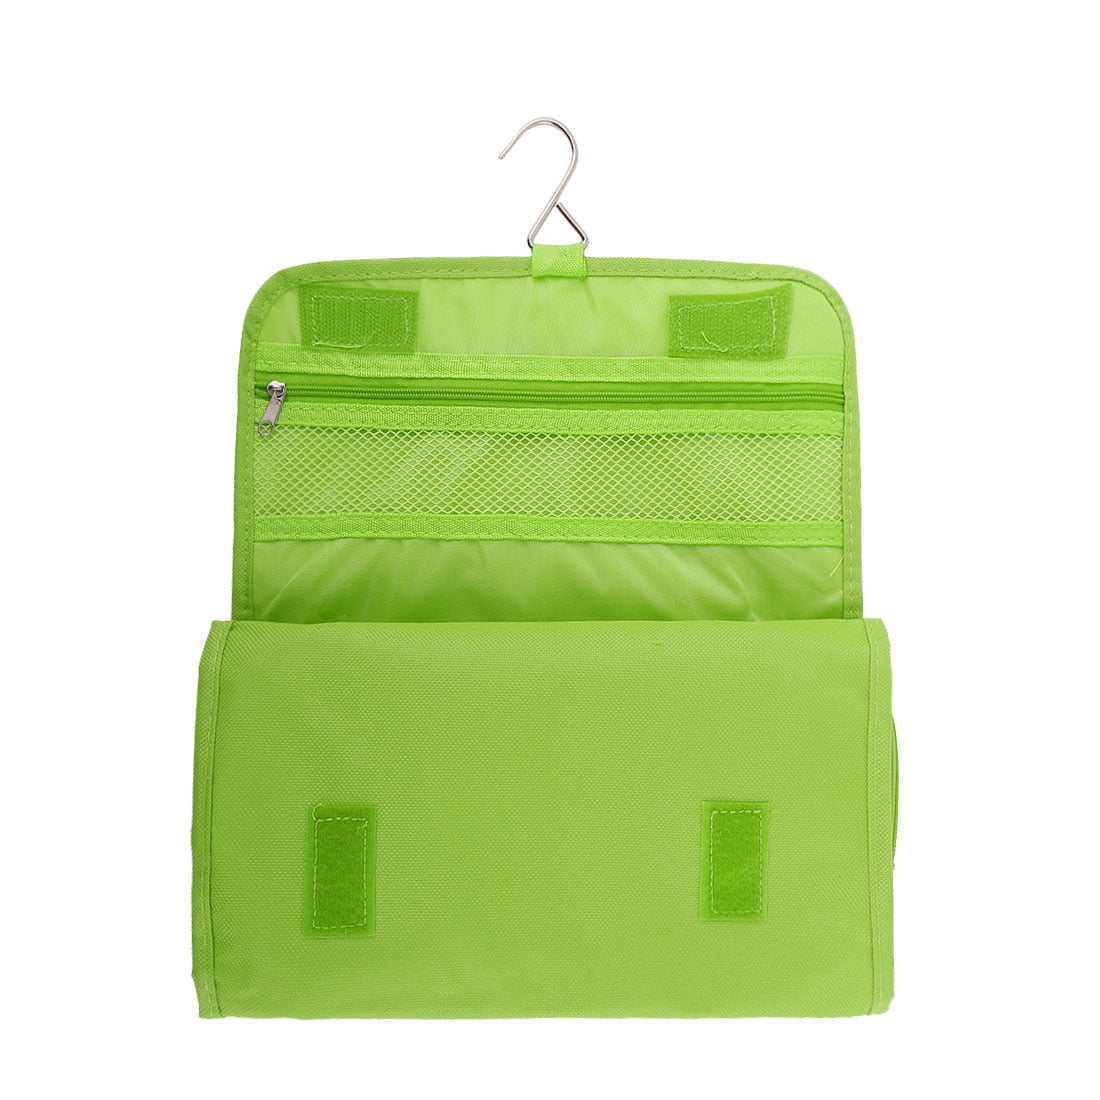 Canvas Cosmetic Zipper Closure Wash Storage Carry Hanging Bag Green - 0 - 0